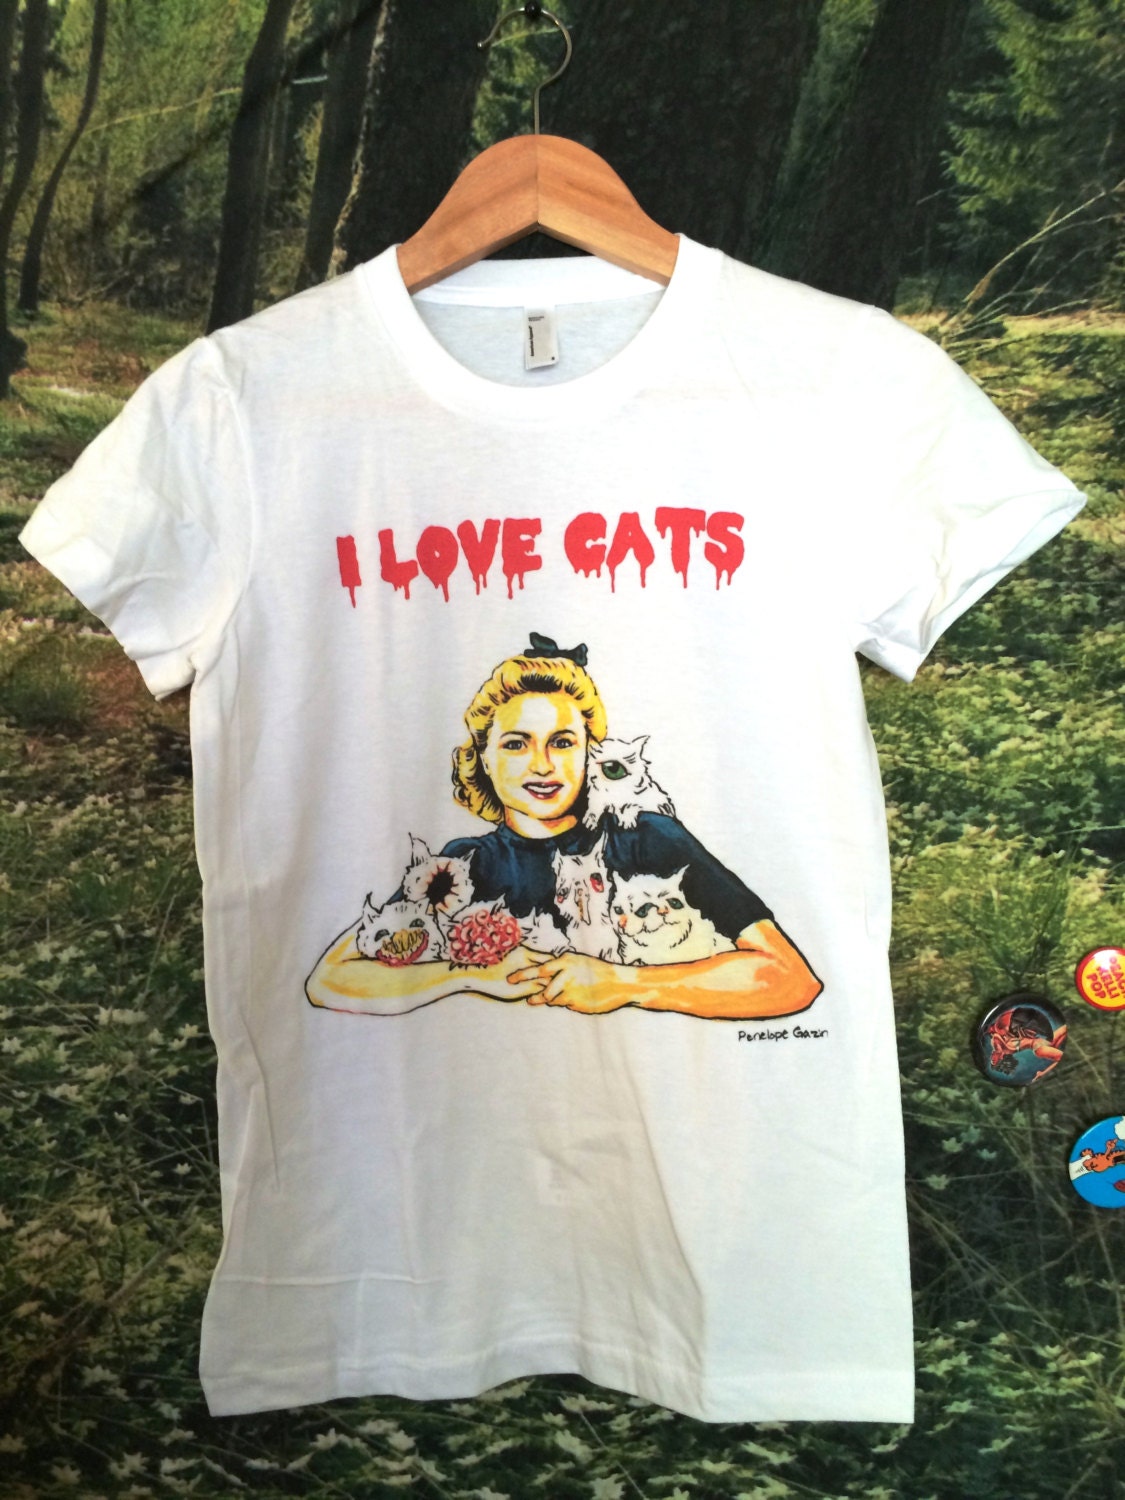 I love Cats Artist Tshirt Men's and Women's by PenelopeMeatloaf